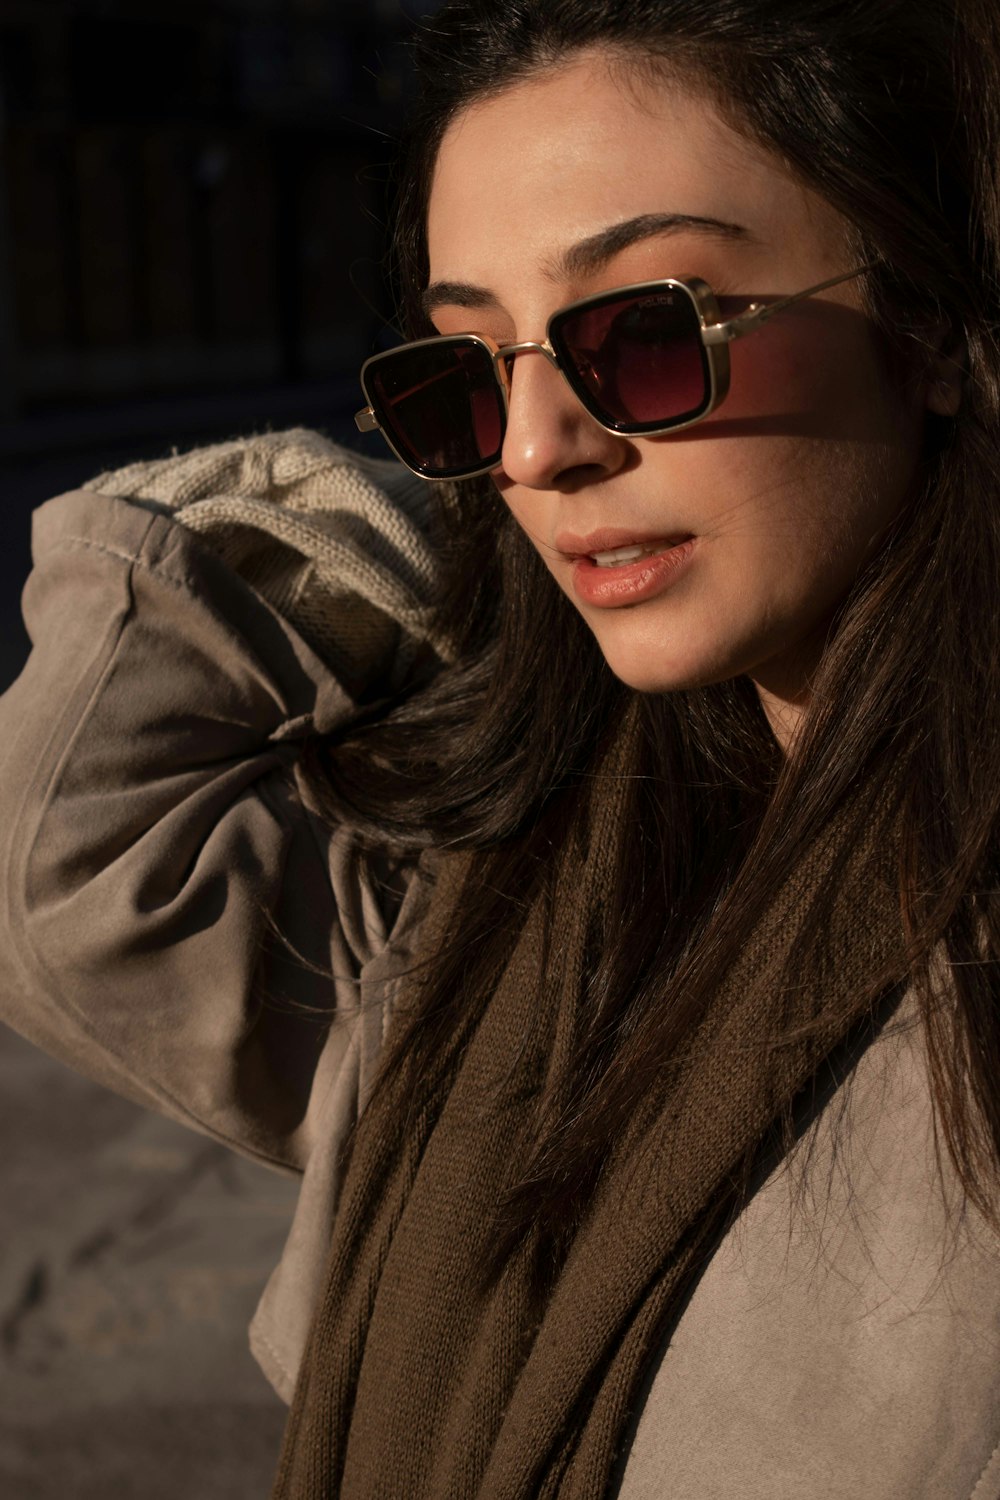 a woman wearing sunglasses and a brown jacket